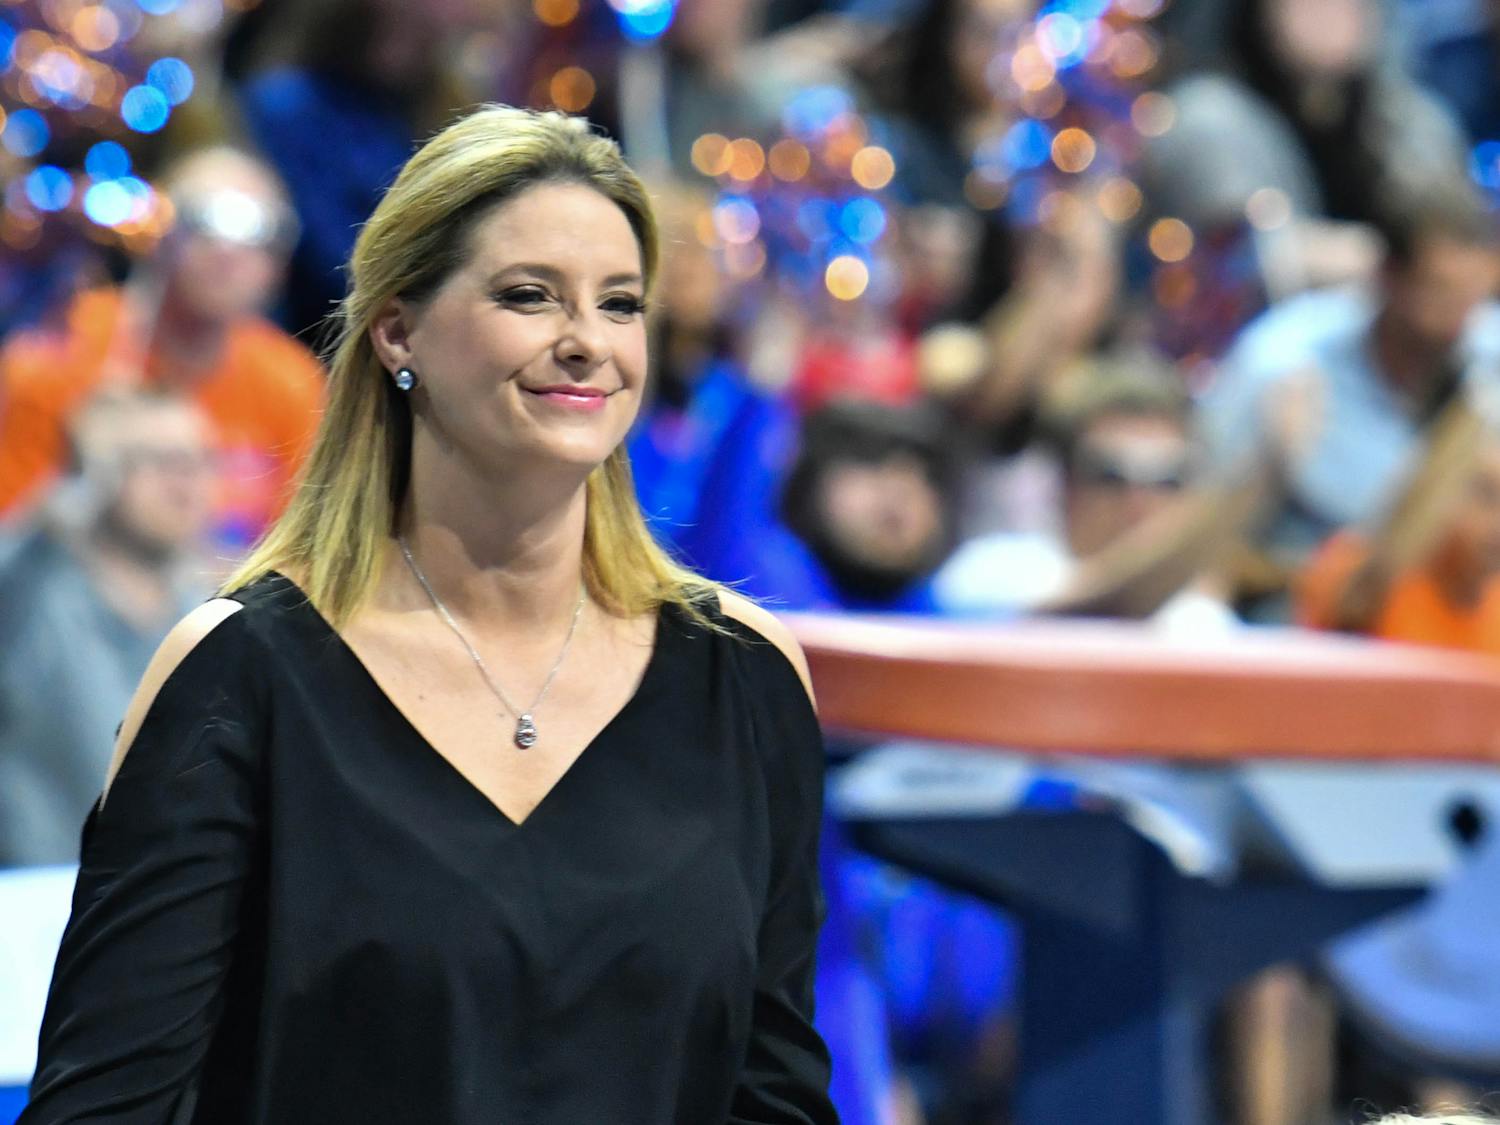 Coach Jenny Rowland and the No. 5 Gators get their second opportunity to take down the No. 1 team in three weeks at the O'Connell Center tonight. “The Gators are always up for the challenge, and this weekend is not gonna be any different.”